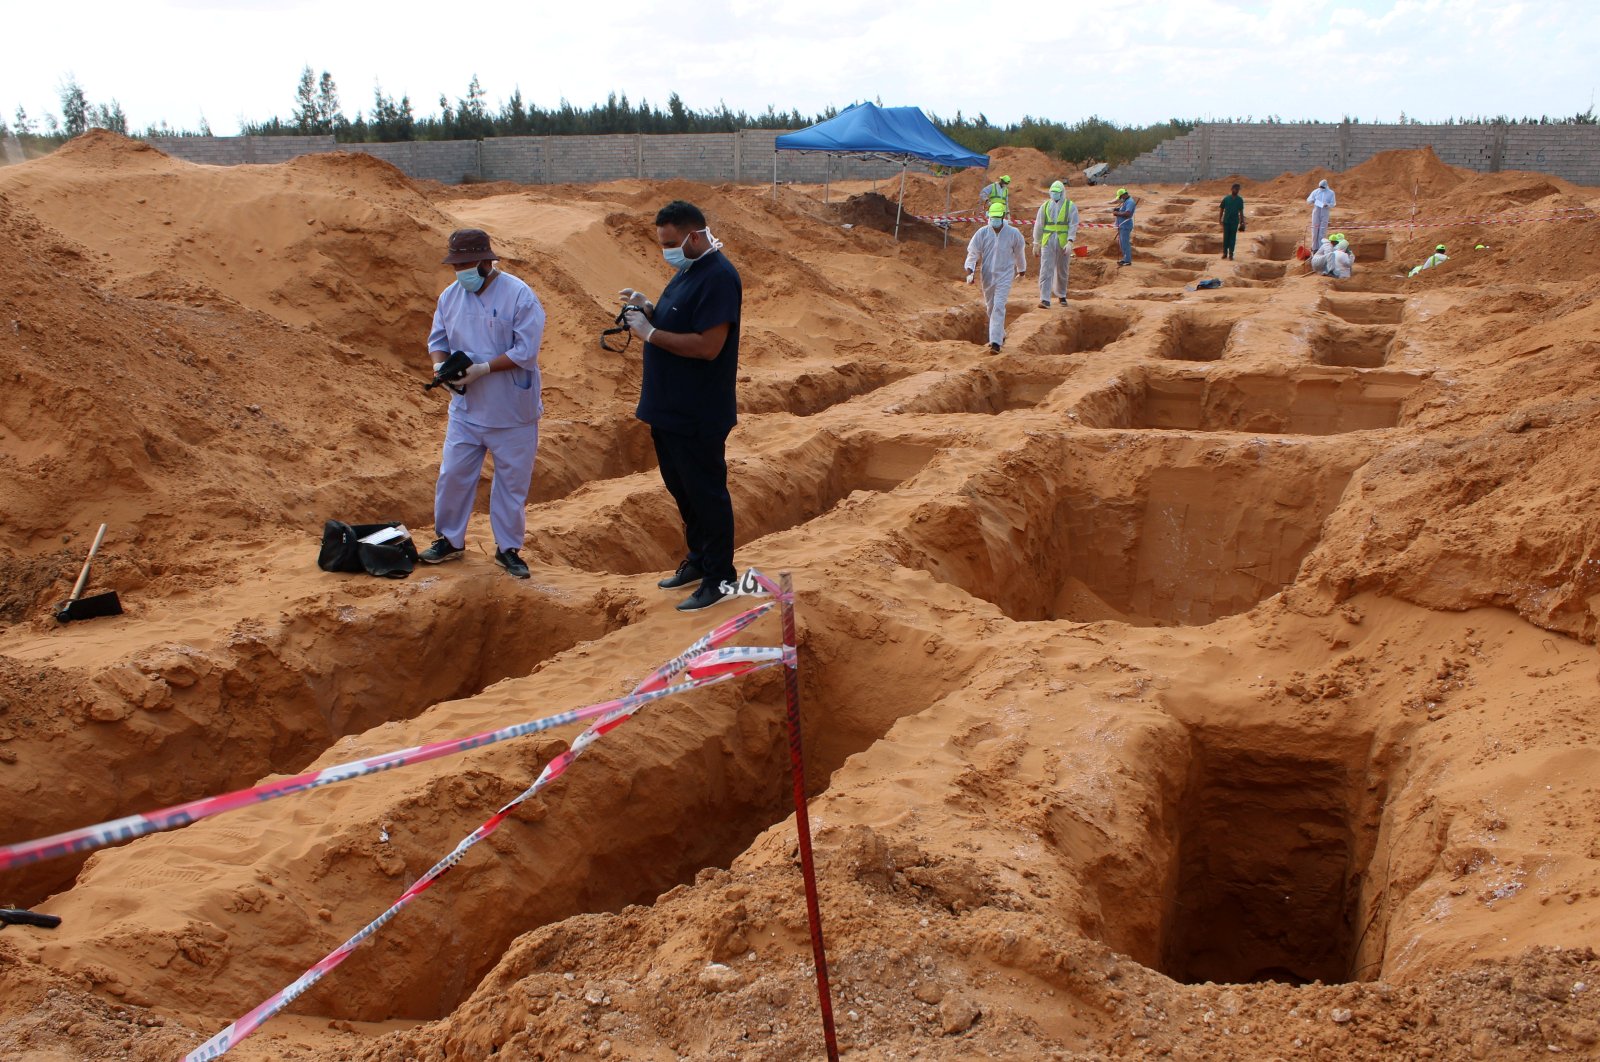 Members of the Government of National Accord's (GNA) missing persons bureau, gather to exhume bodies in a mass grave, in Tarhuna city, Libya, Oct. 27, 2020. (Reuters File Photo)